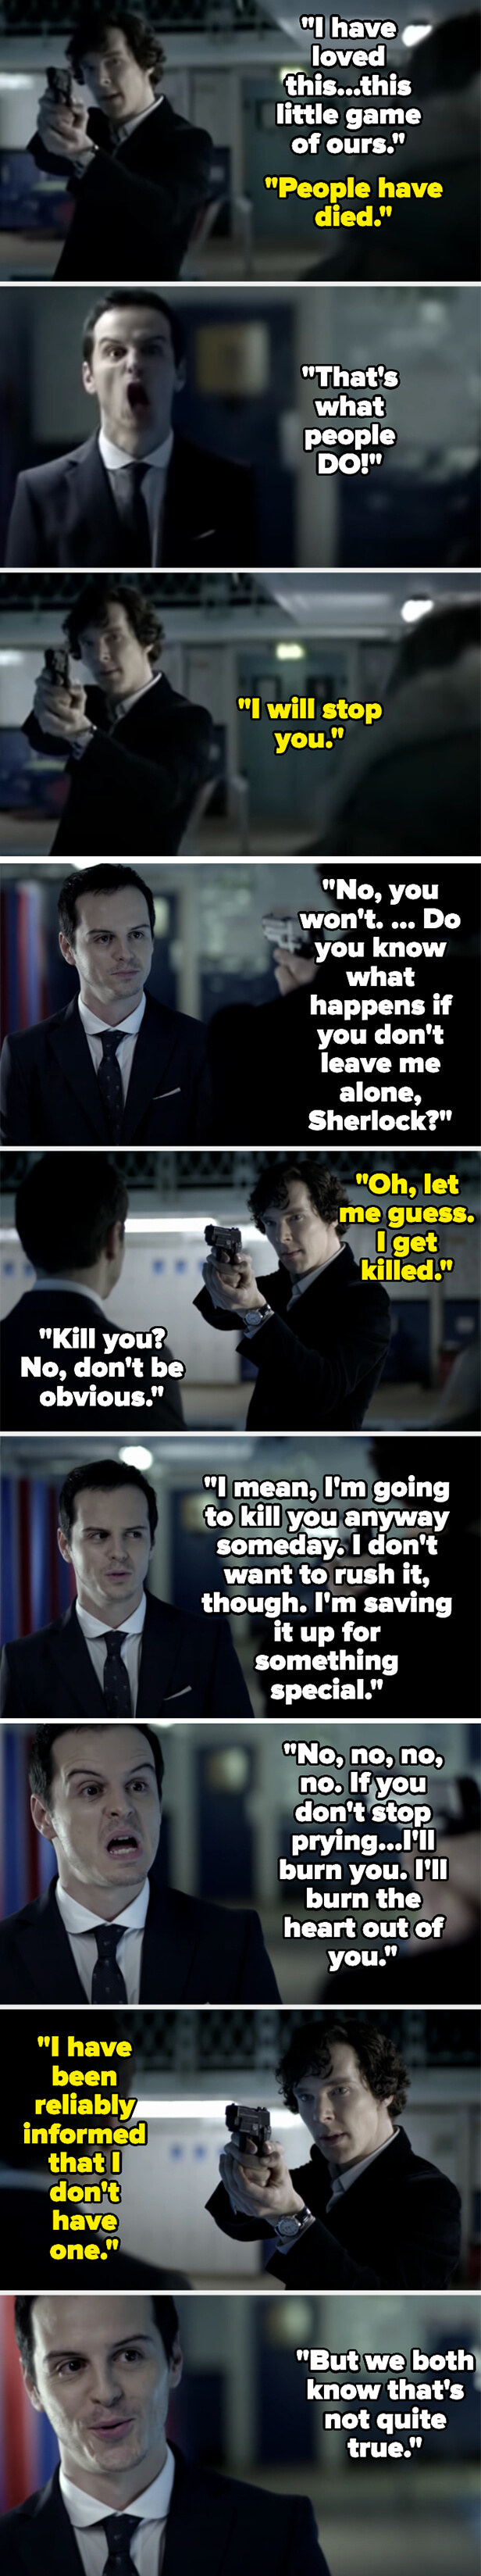 Moriarty says he&#x27;s loved this game, and Sherlock says people have died. Moriarty says that&#x27;s what people do, and that if Sherlock doesn&#x27;t back off, he won&#x27;t just kill him - he&#x27;ll burn the heart out of him